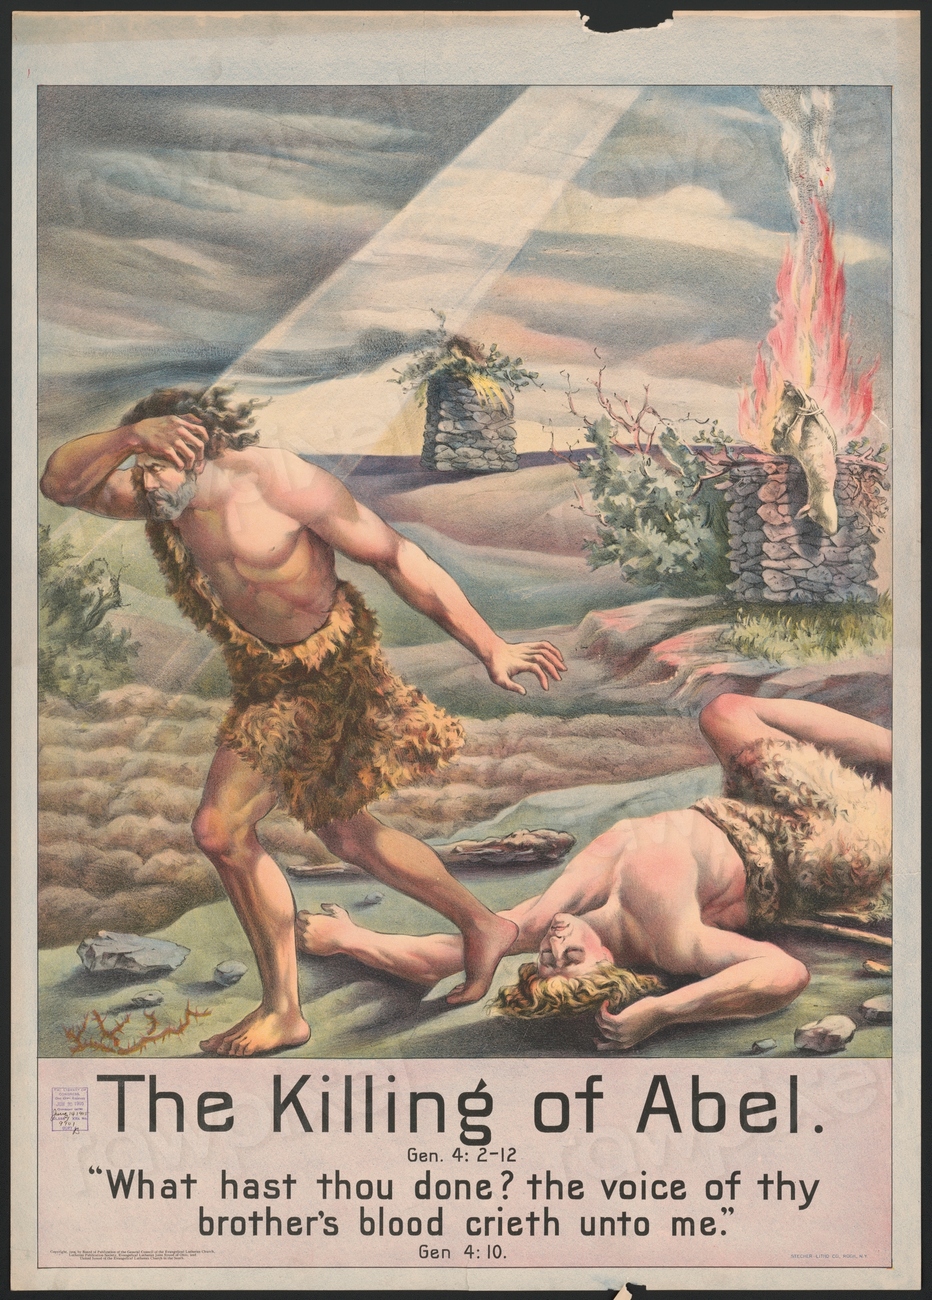 The killing of Abel - why do men feel the need to kill?